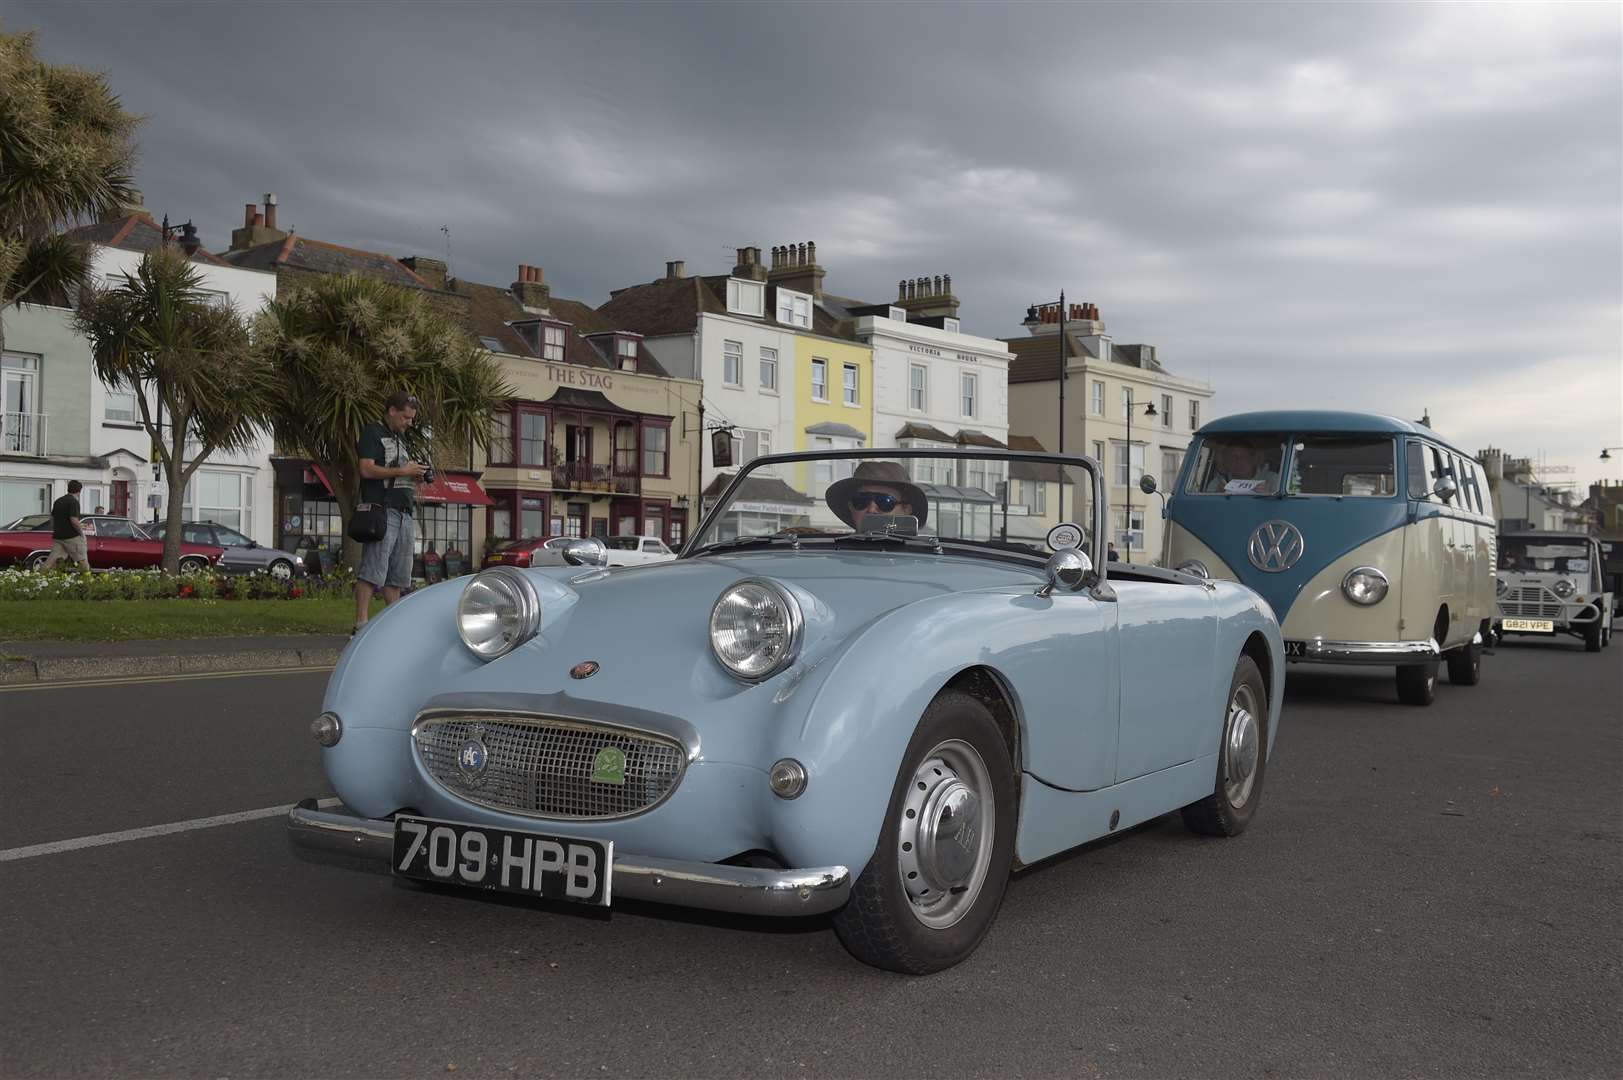 Come rain or shine, the exhibits at Deal Classic Motor Show are enough to turn heads